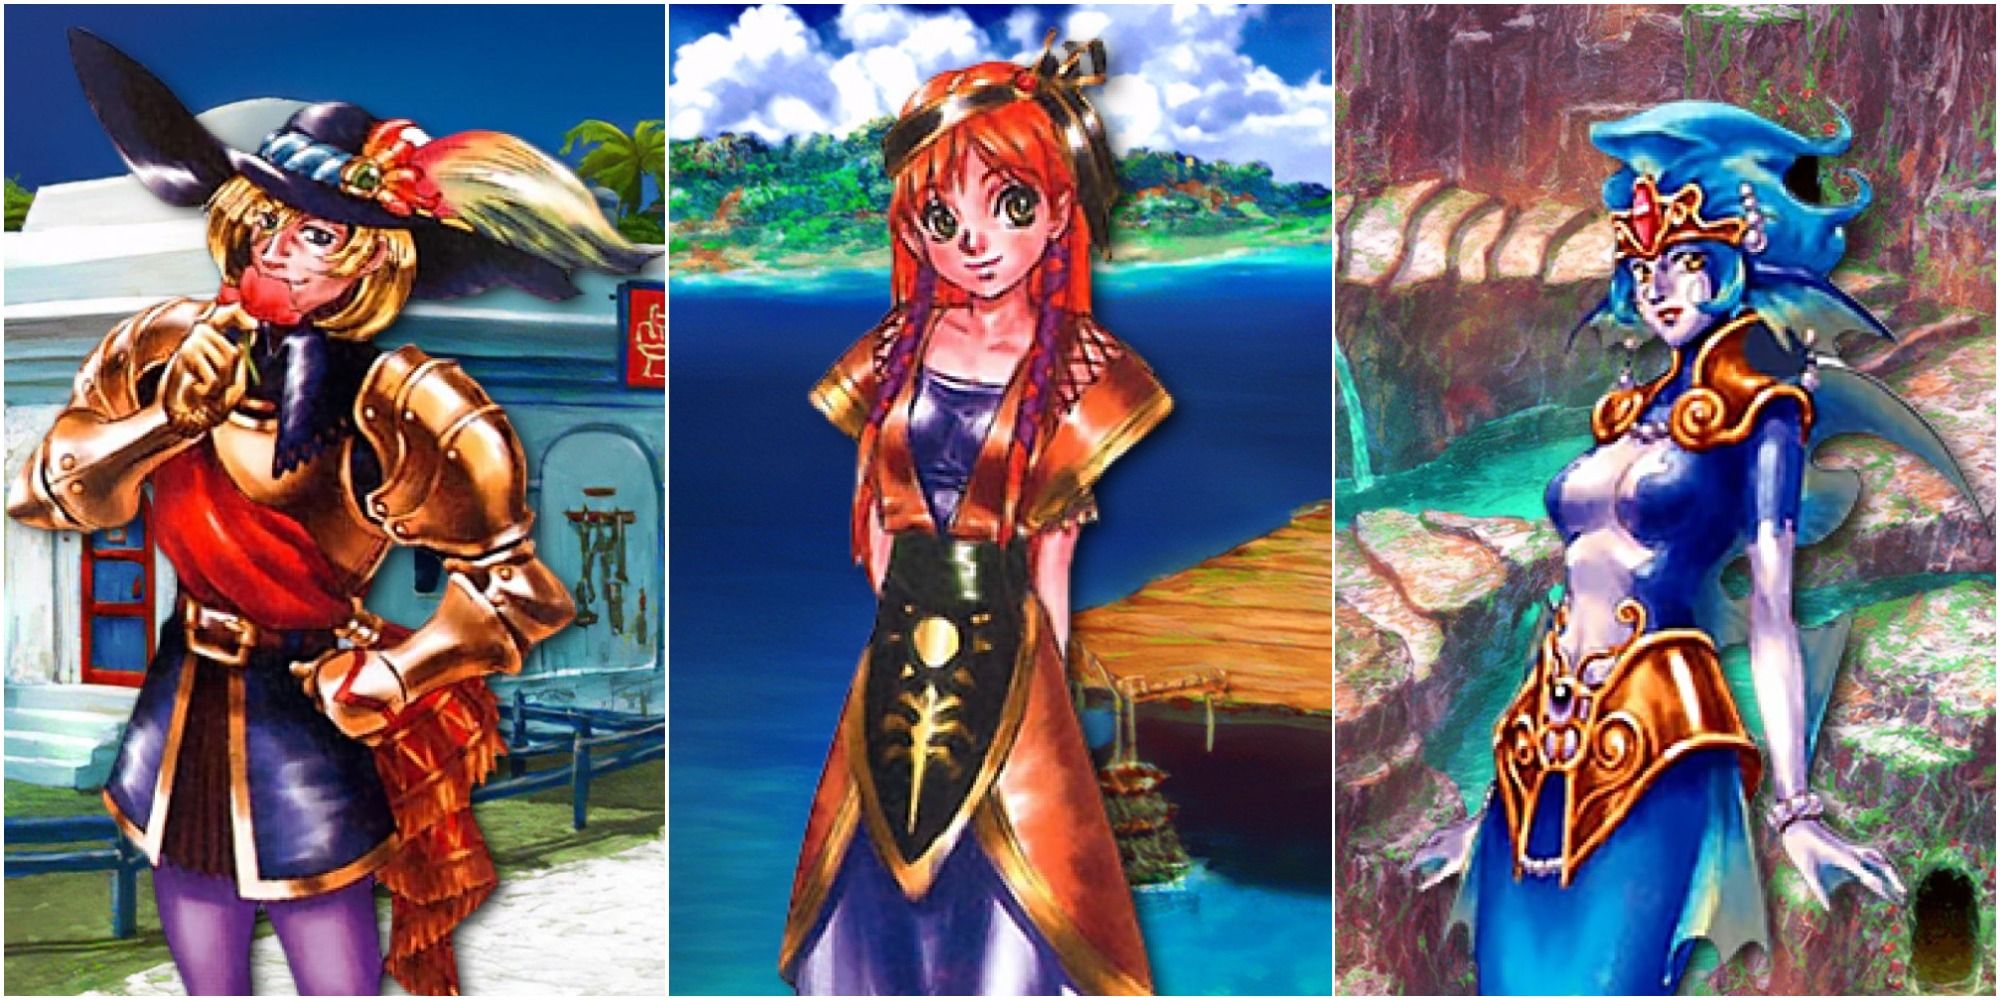 How To Unlock Every Character In Chrono Cross